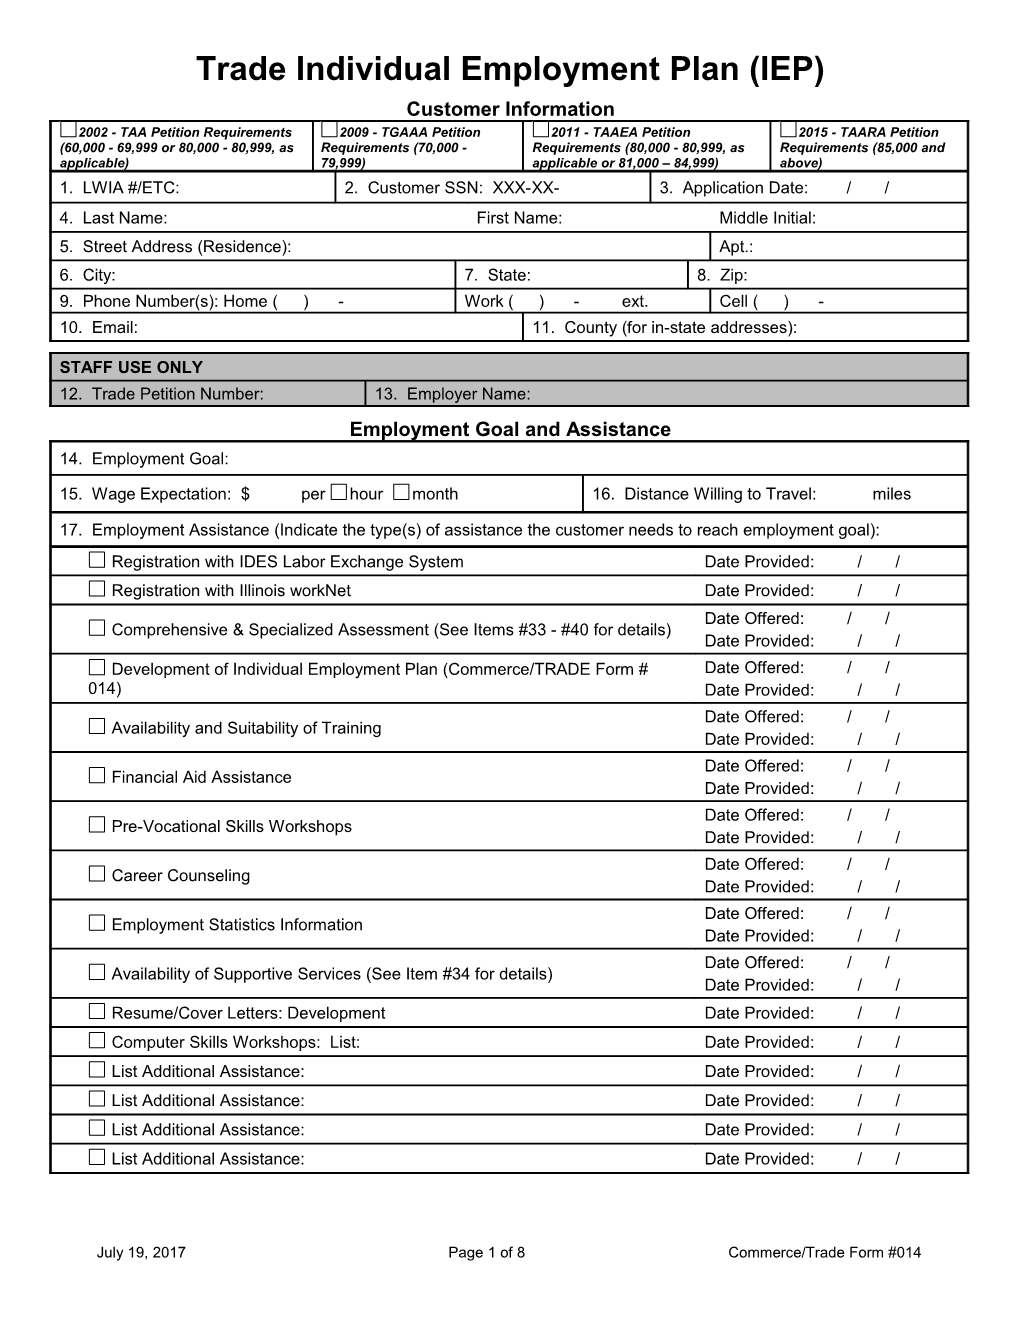 Form #014 Trade Individual Employment Plan (IEP) (MS Word) 3-01-14